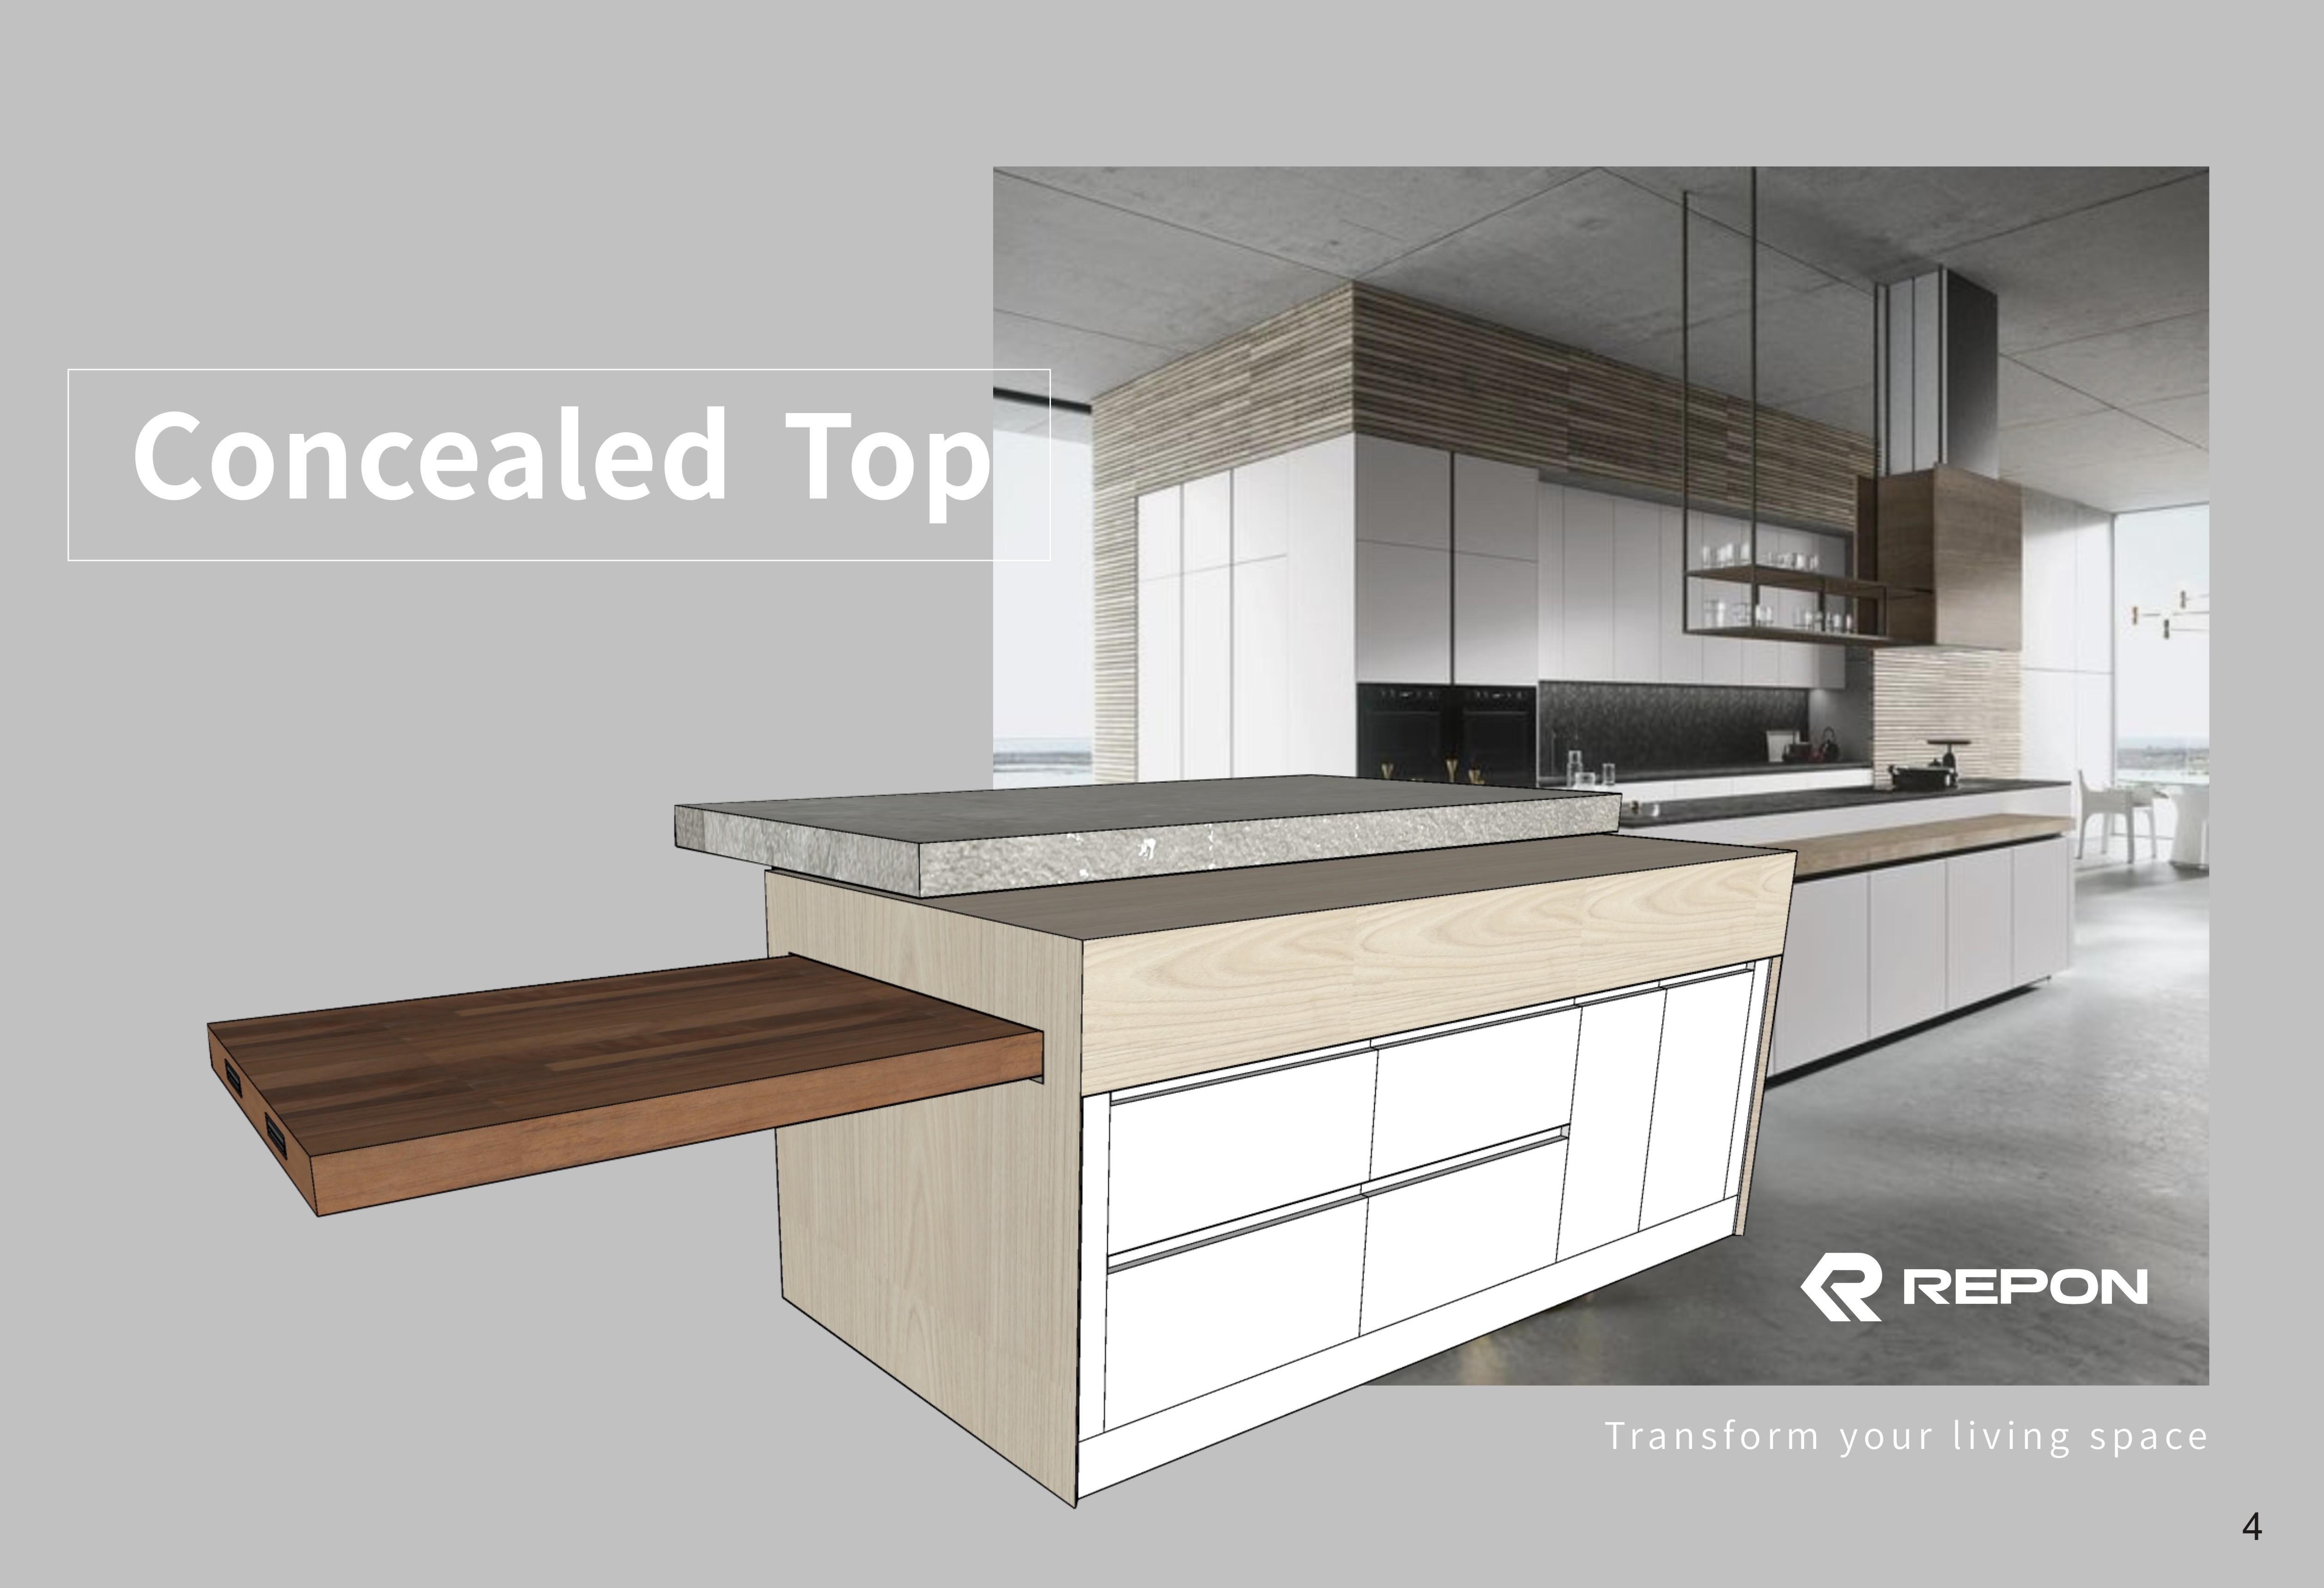 REPON Total Soultion -  Kitchen island Top Series 